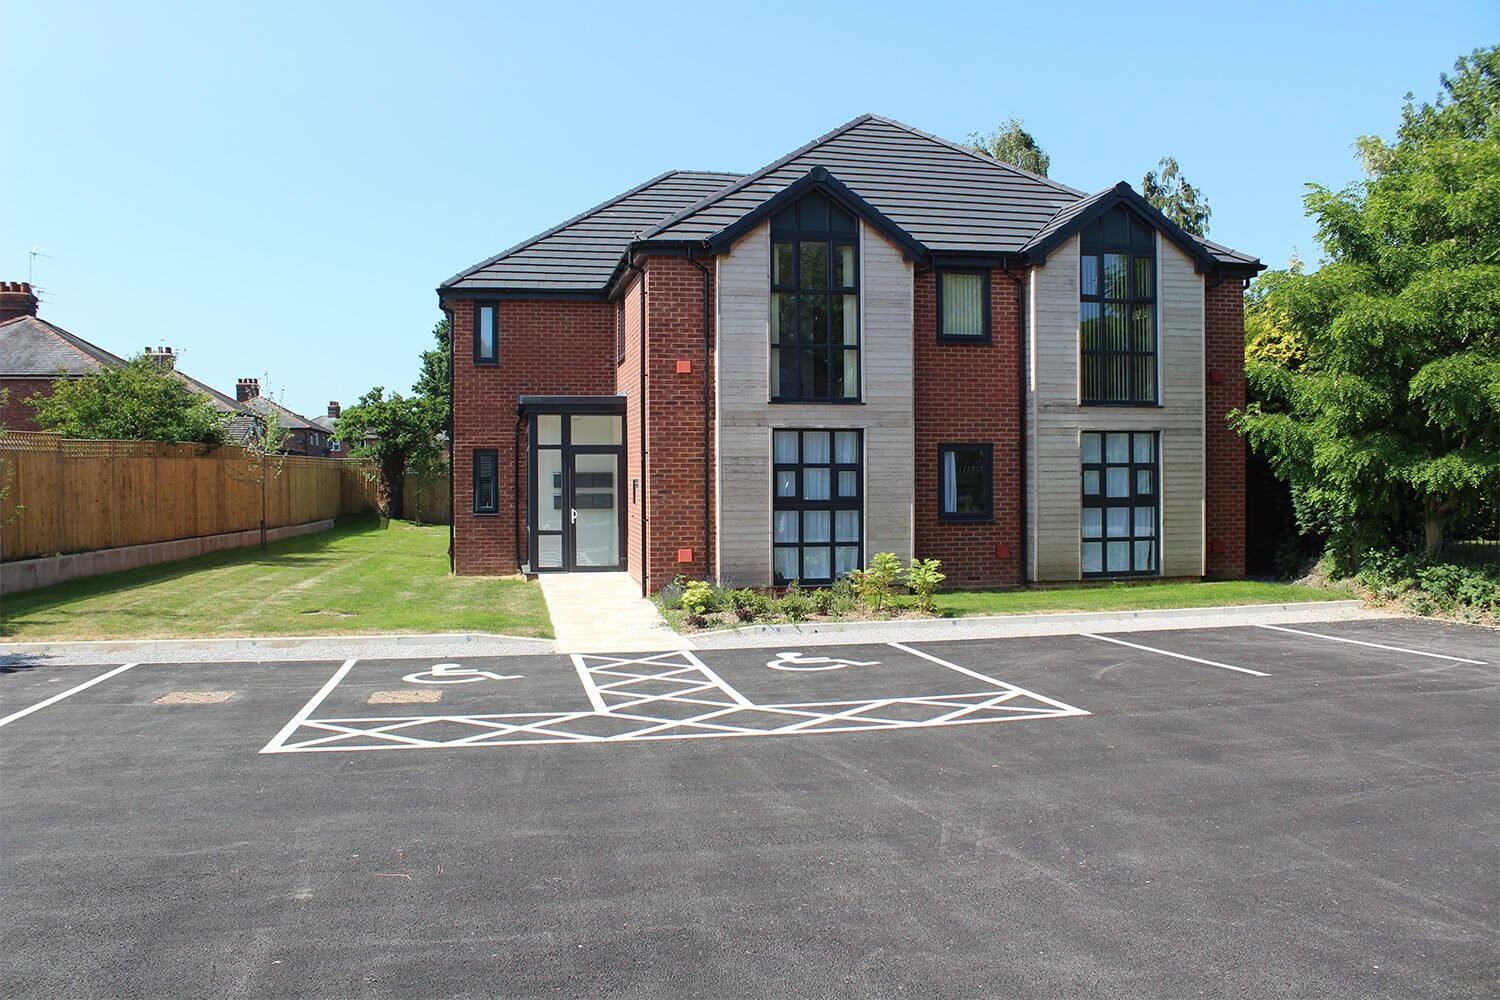 Five Oaks, Knutsford new build apartments